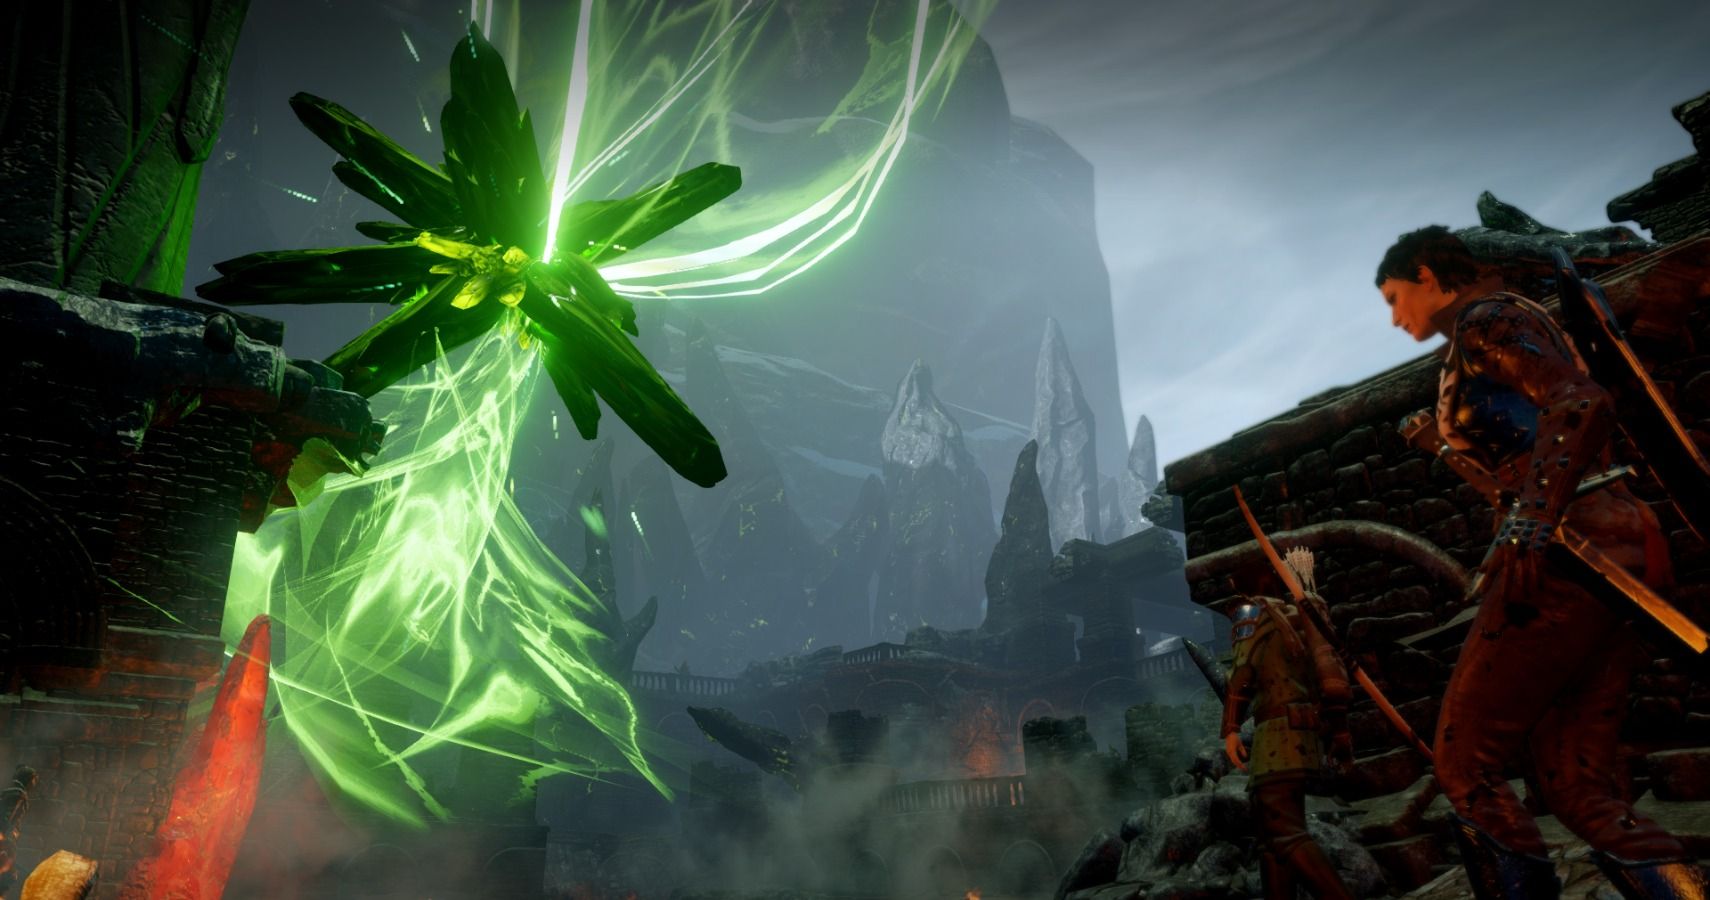 https://www.thegamer.com/dragon-age-inquisition-characters-unanswered-questions/